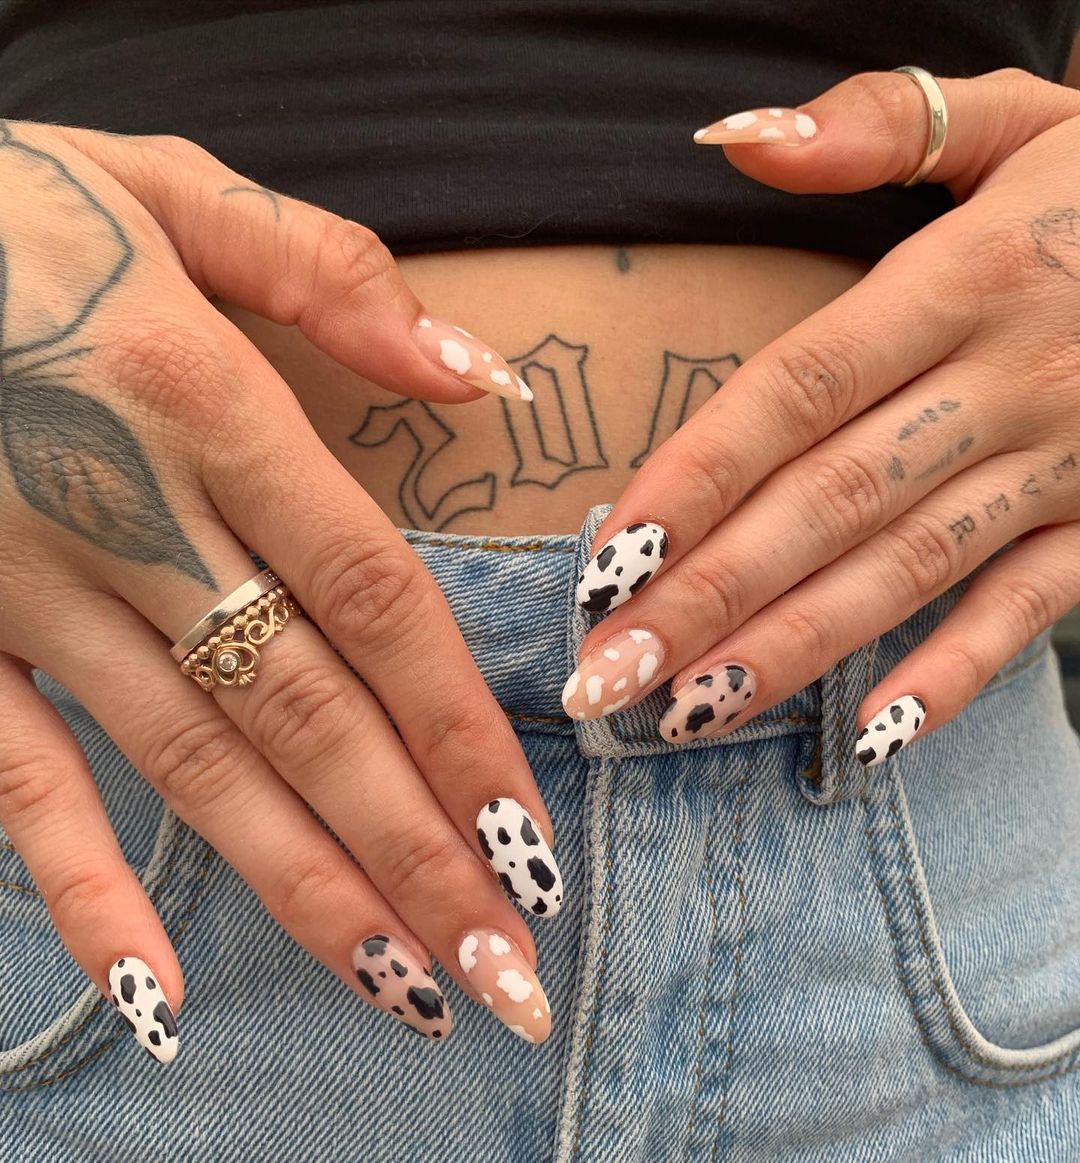 Short Almond Nails with Cow Print Design